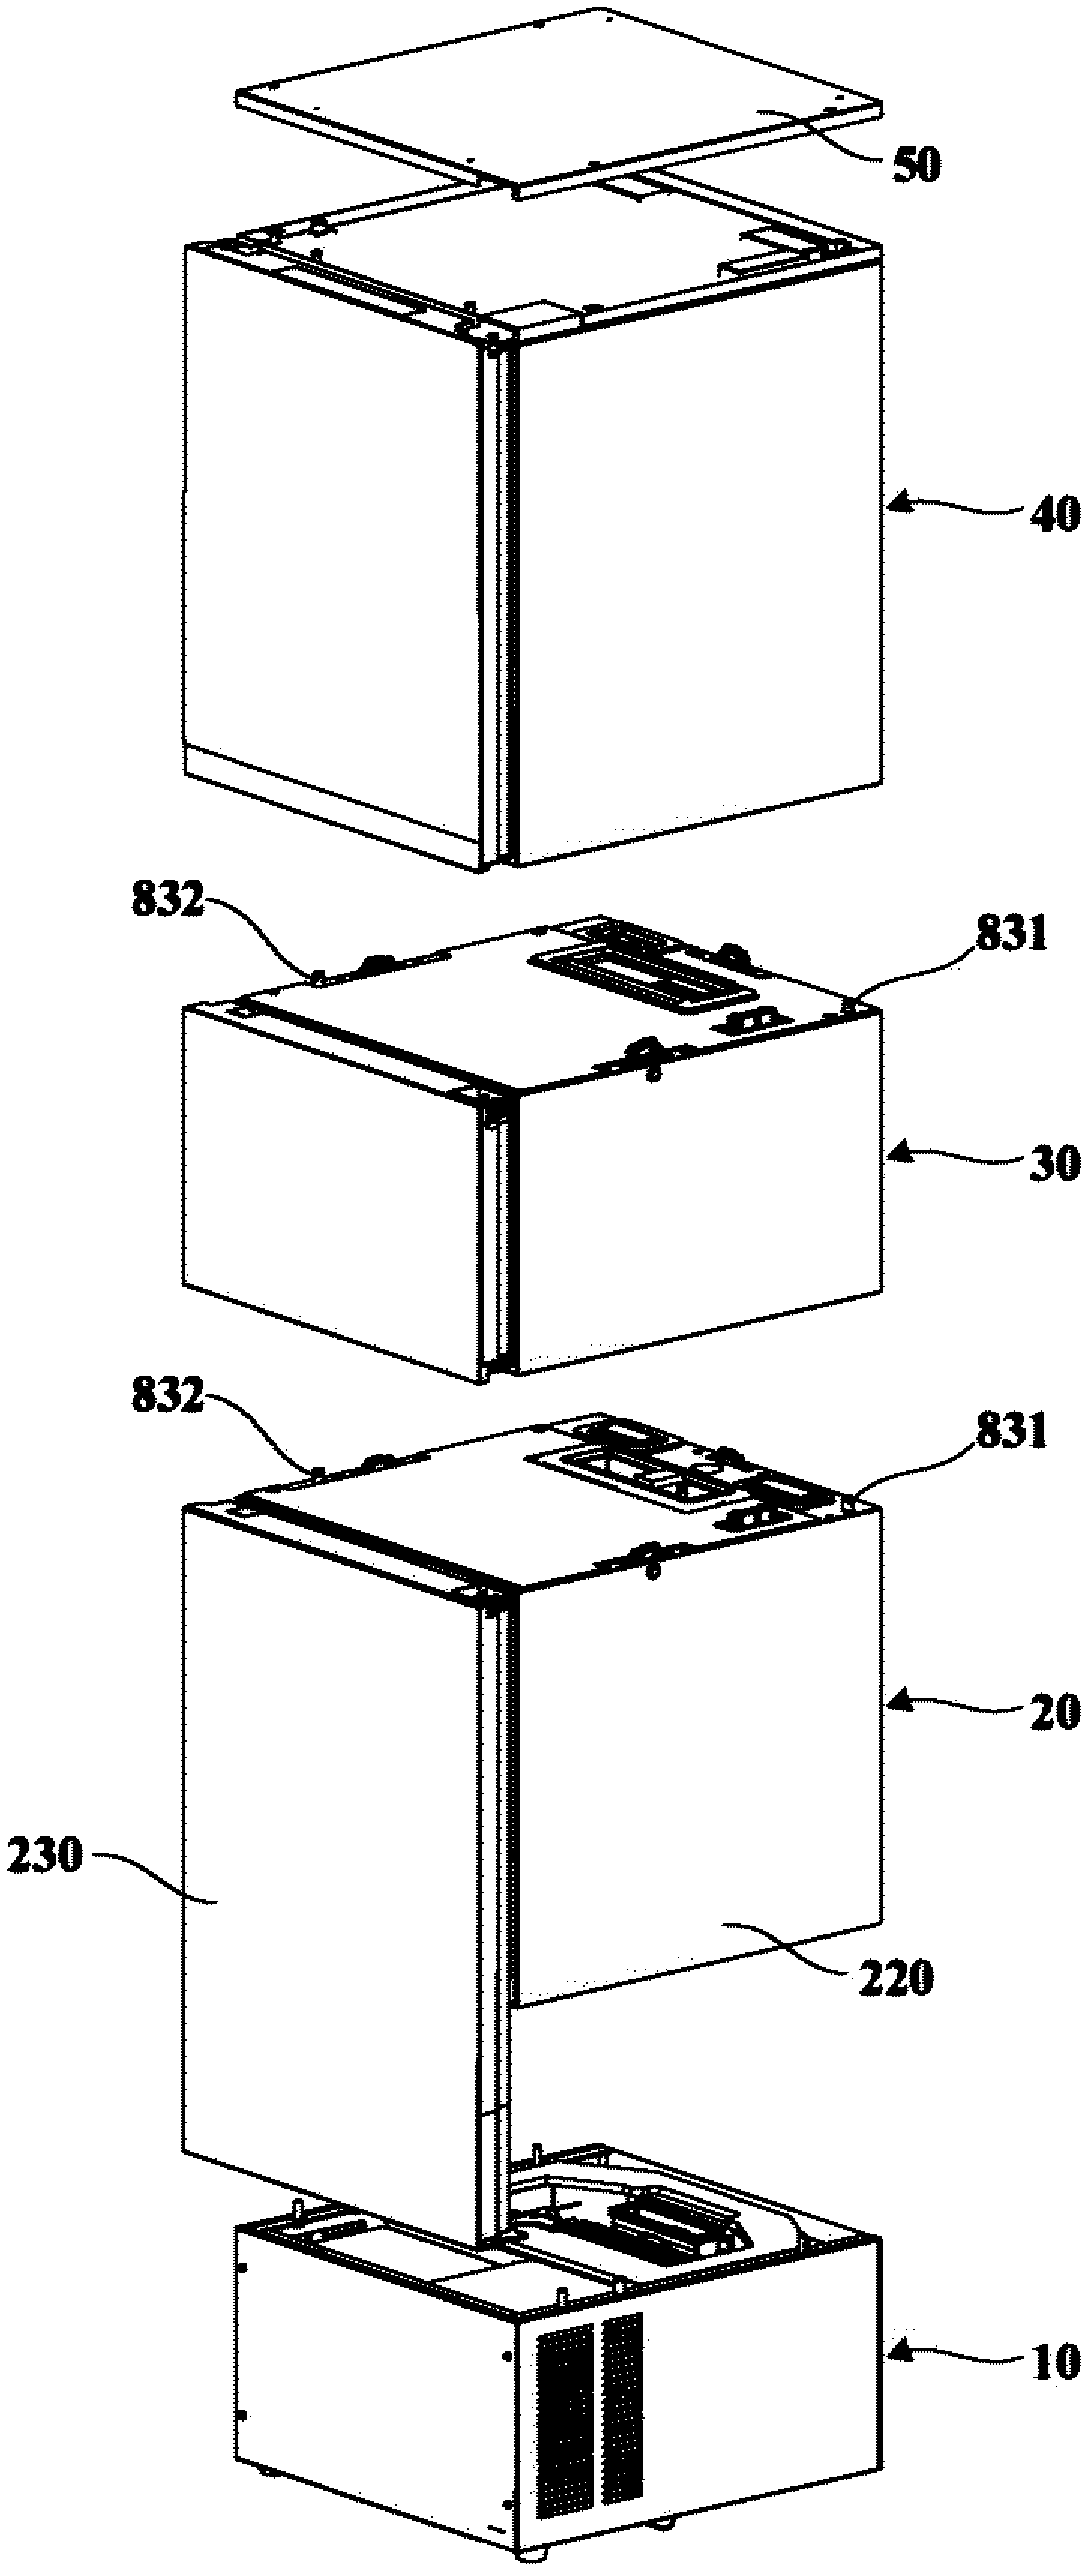 Cold storage and refrigeration device